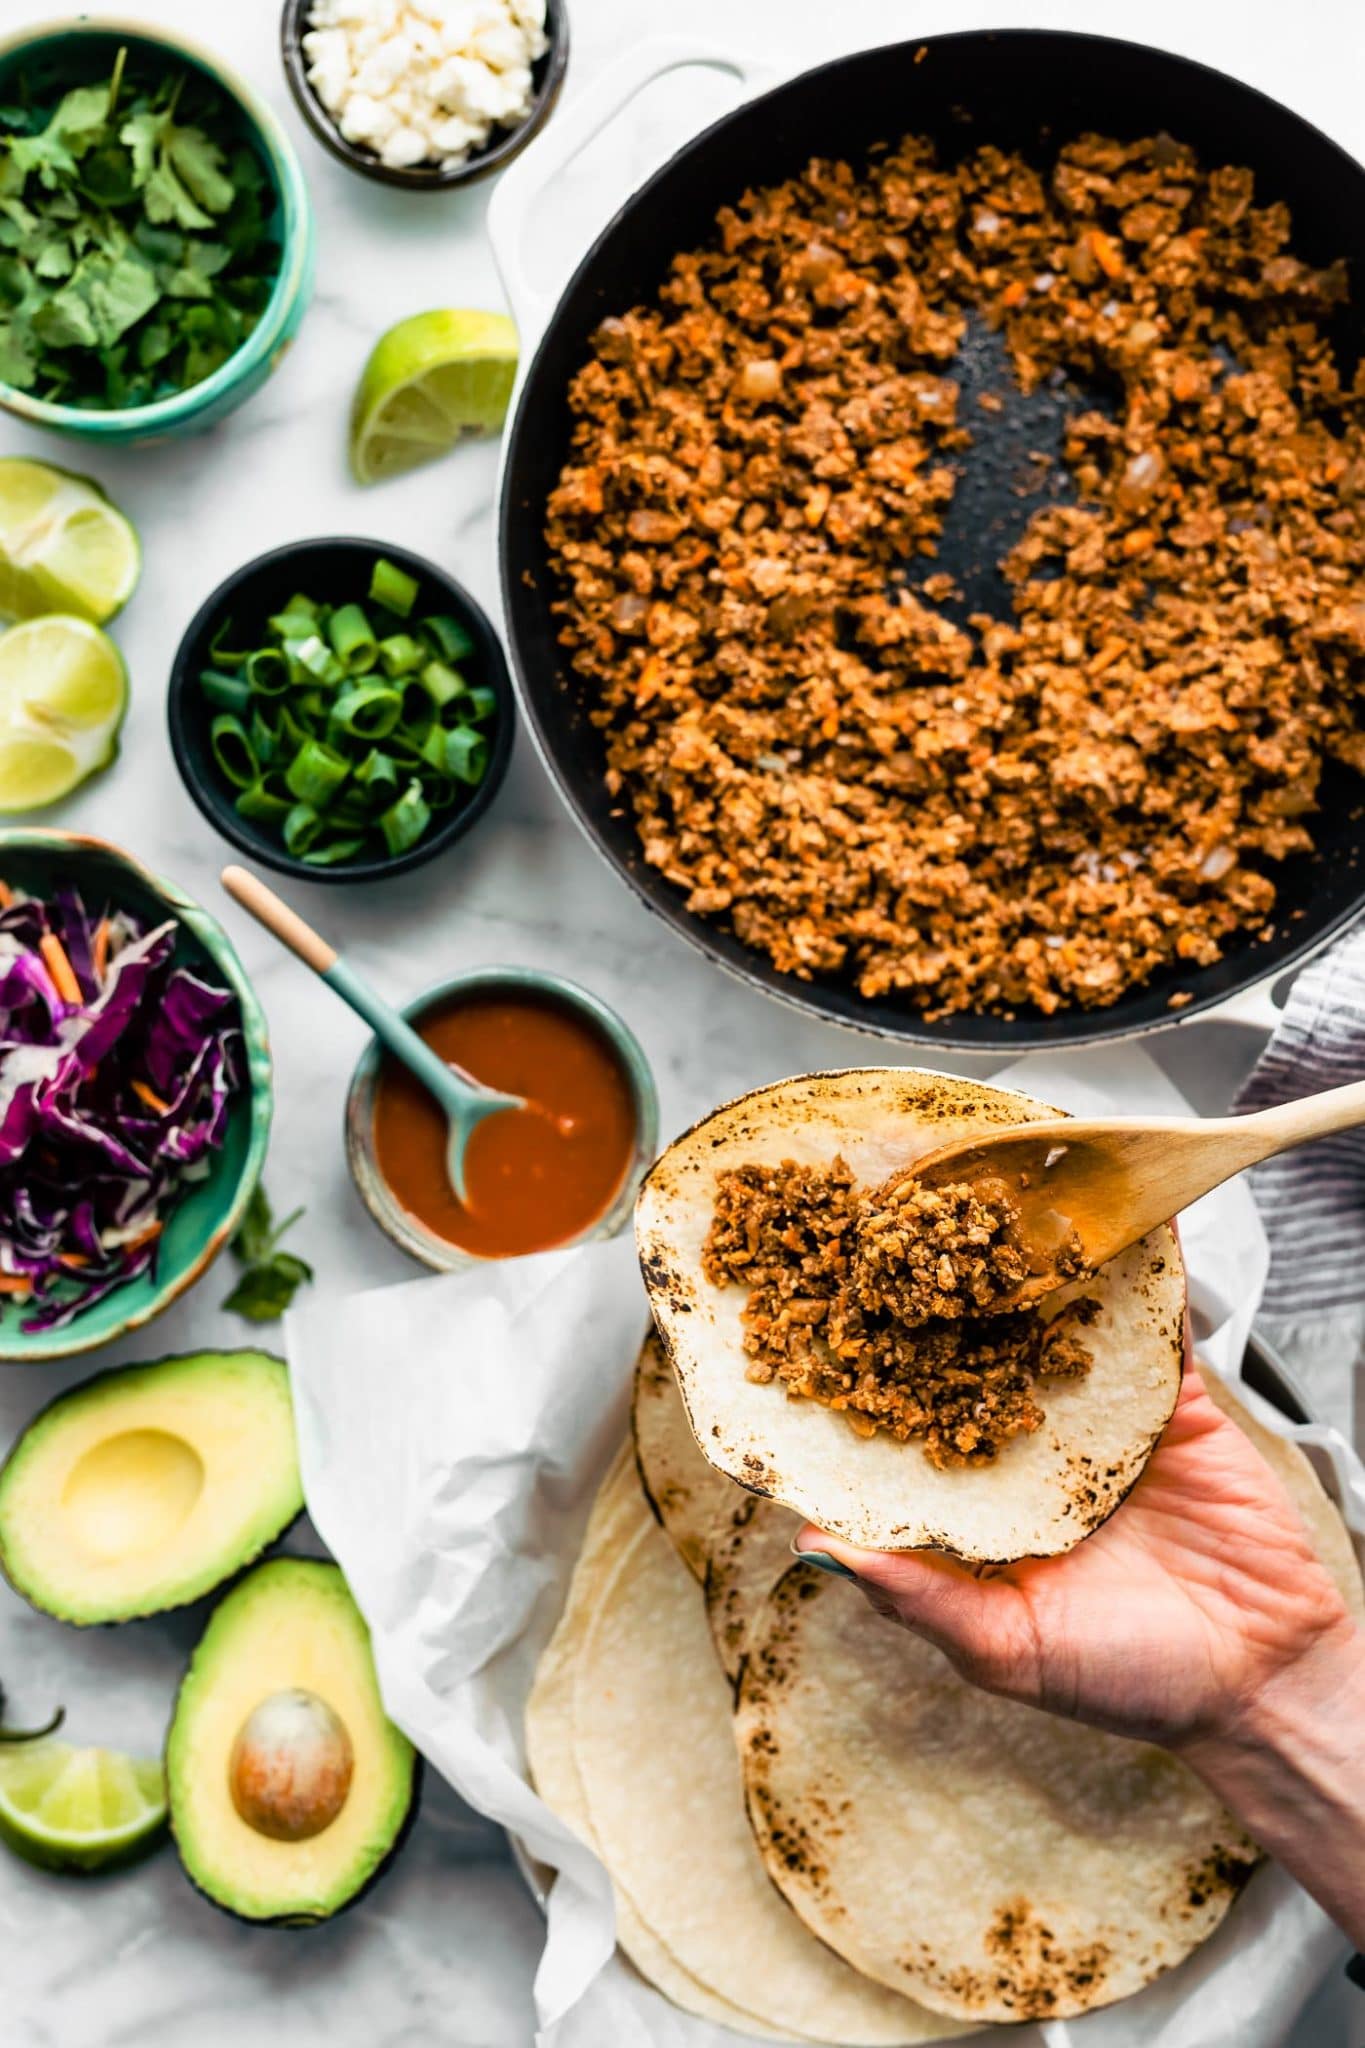 Overhead tabletop image of vegan tacos being prepared with vegan taco meat. Taco toppings including avocado, slaw, limes, cilantro, and green onions can also be seen.